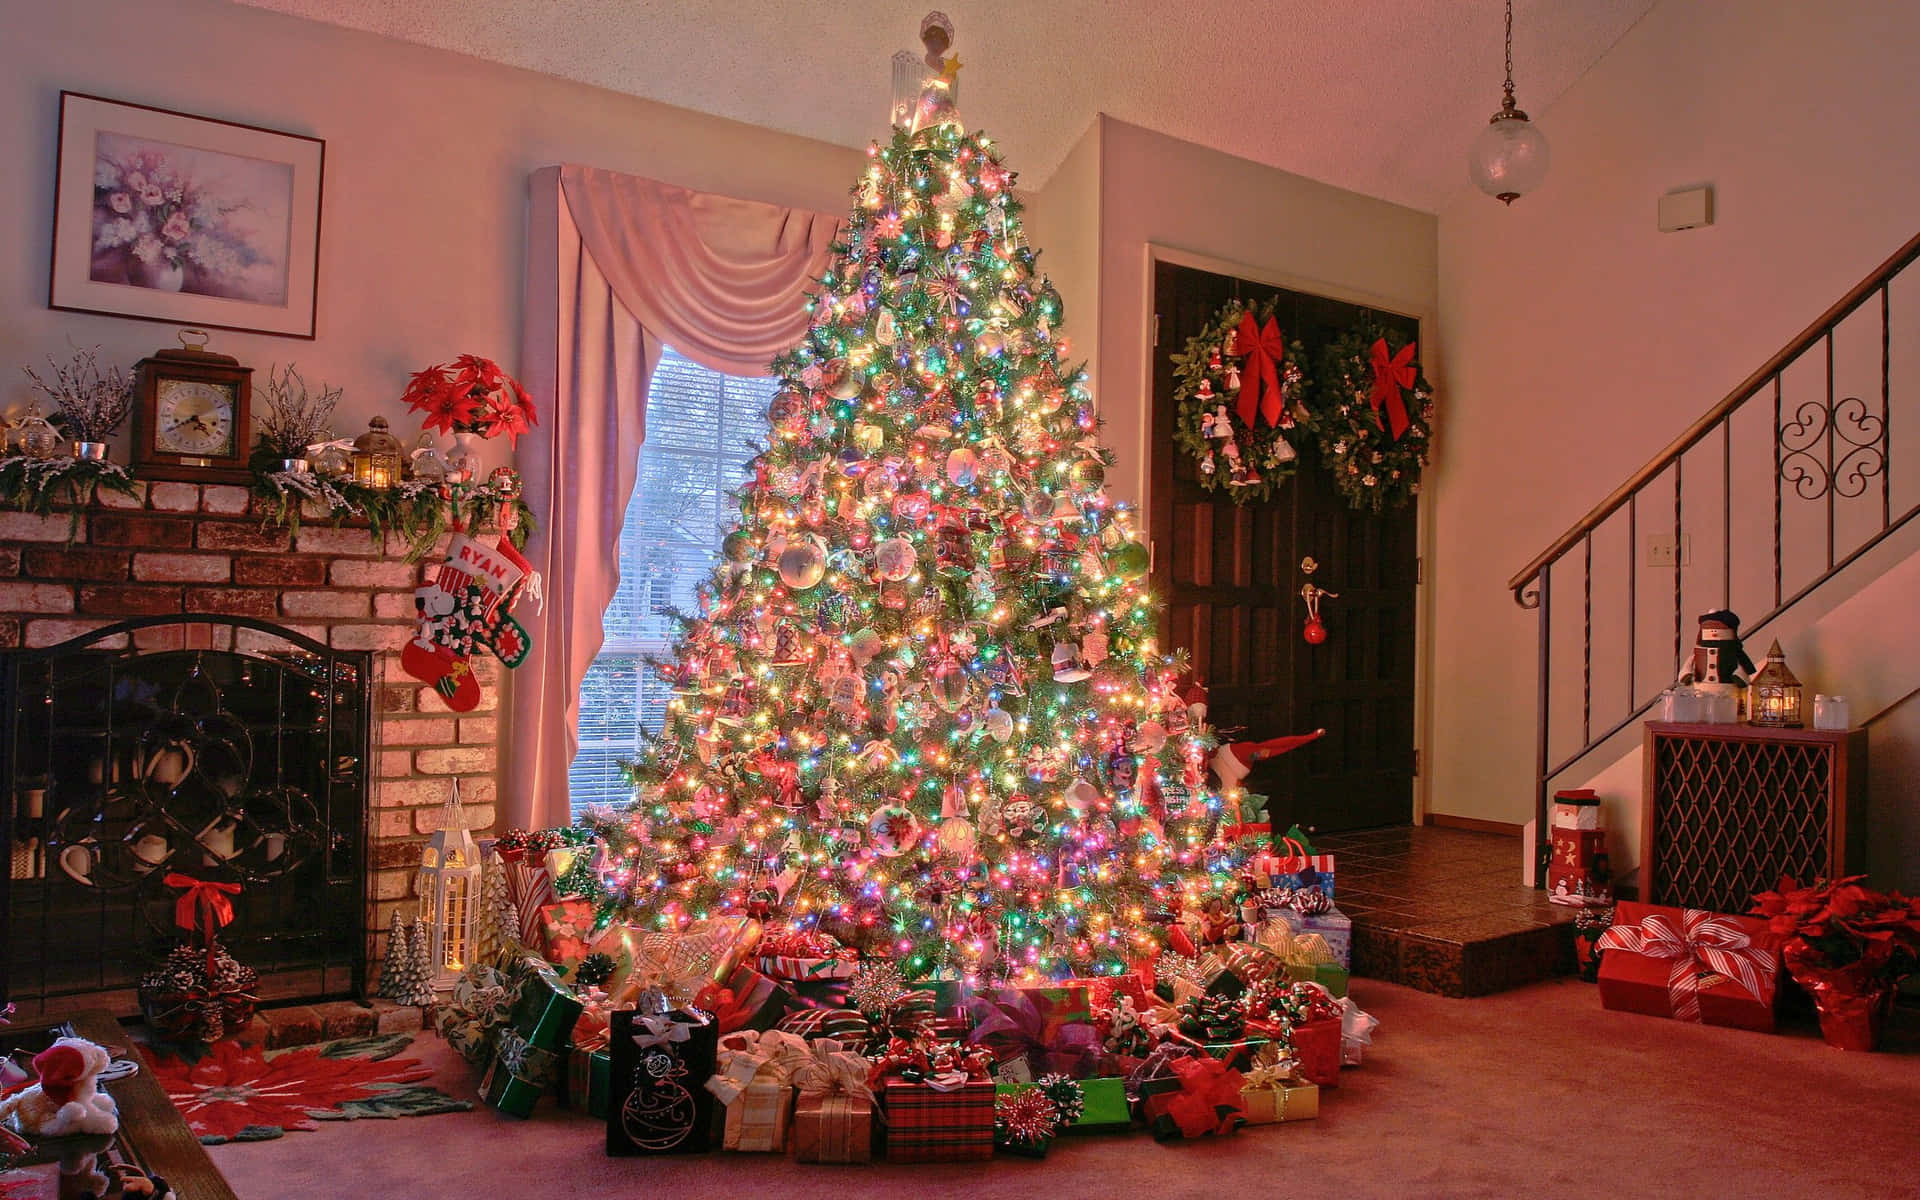 Brightly lit Christmas tree with presents around it.